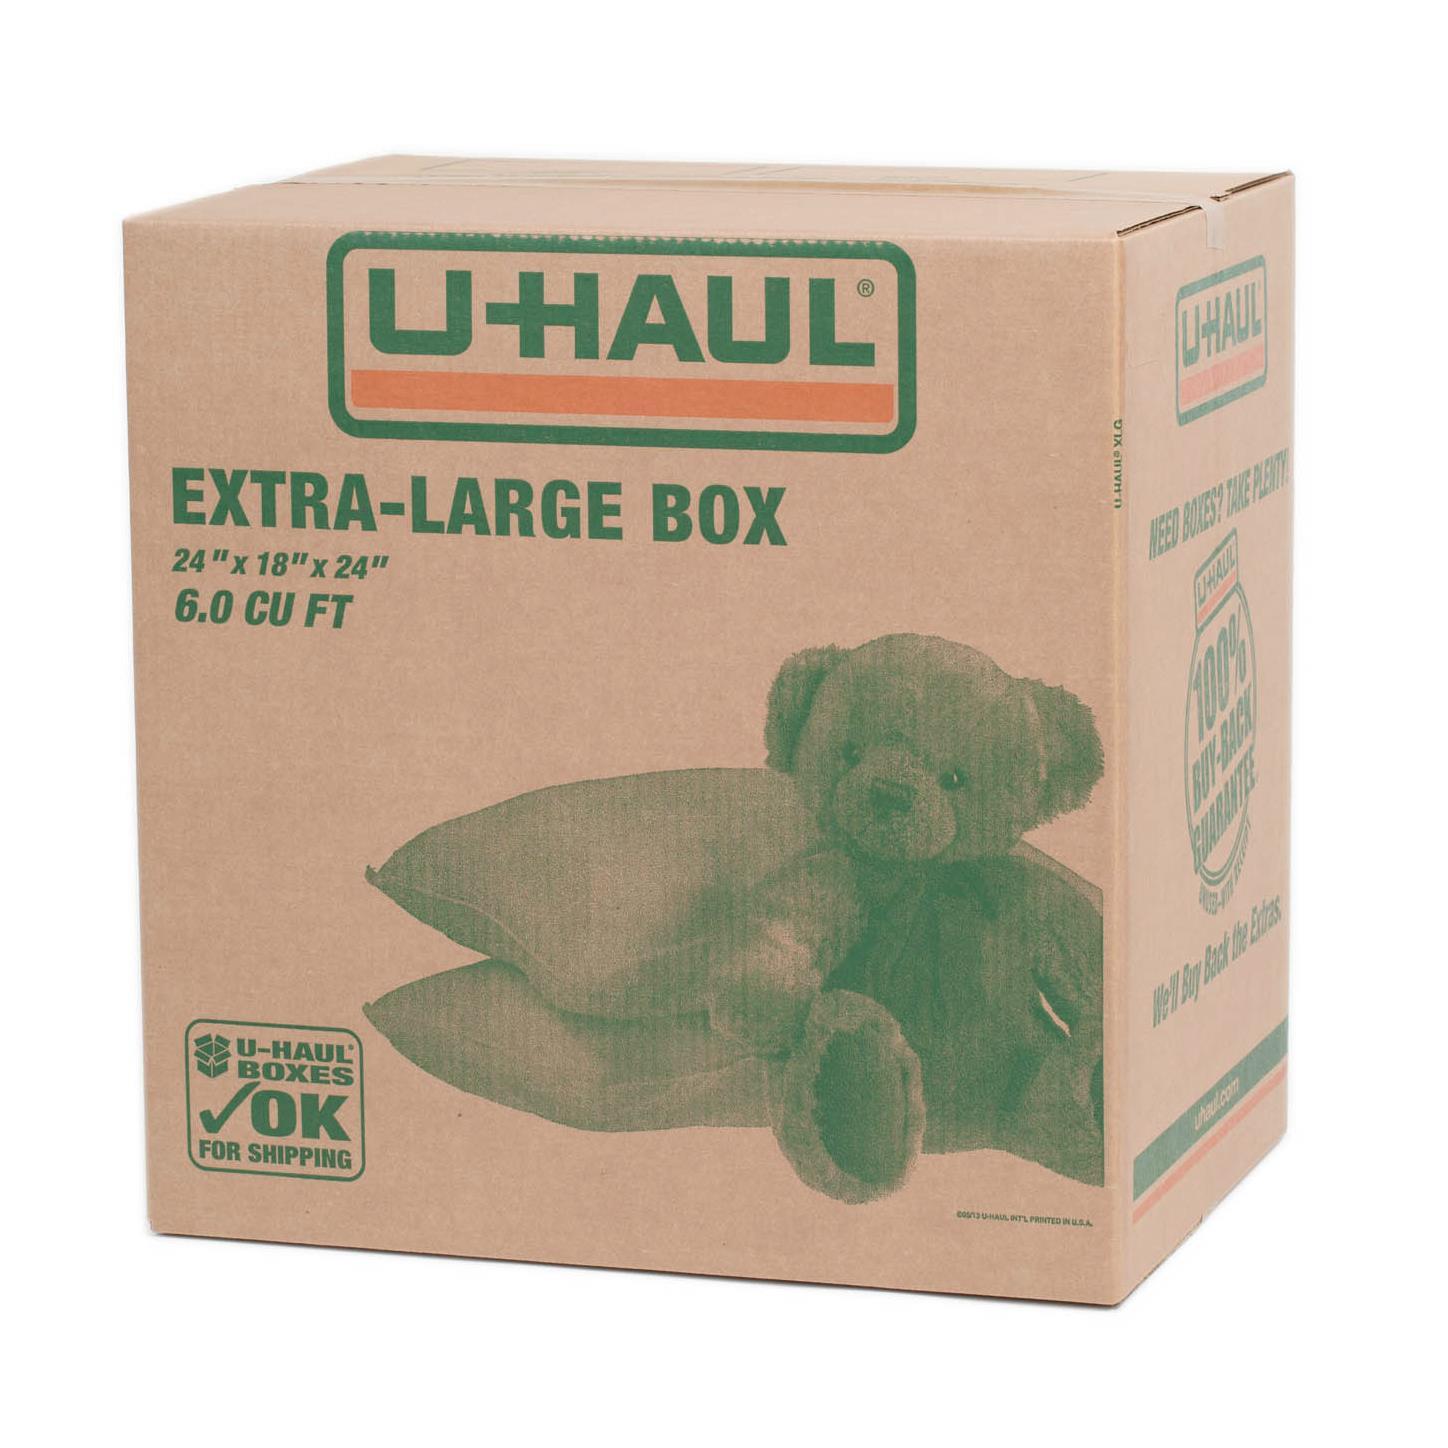 Long Boxes In USA, Large Moving Boxes